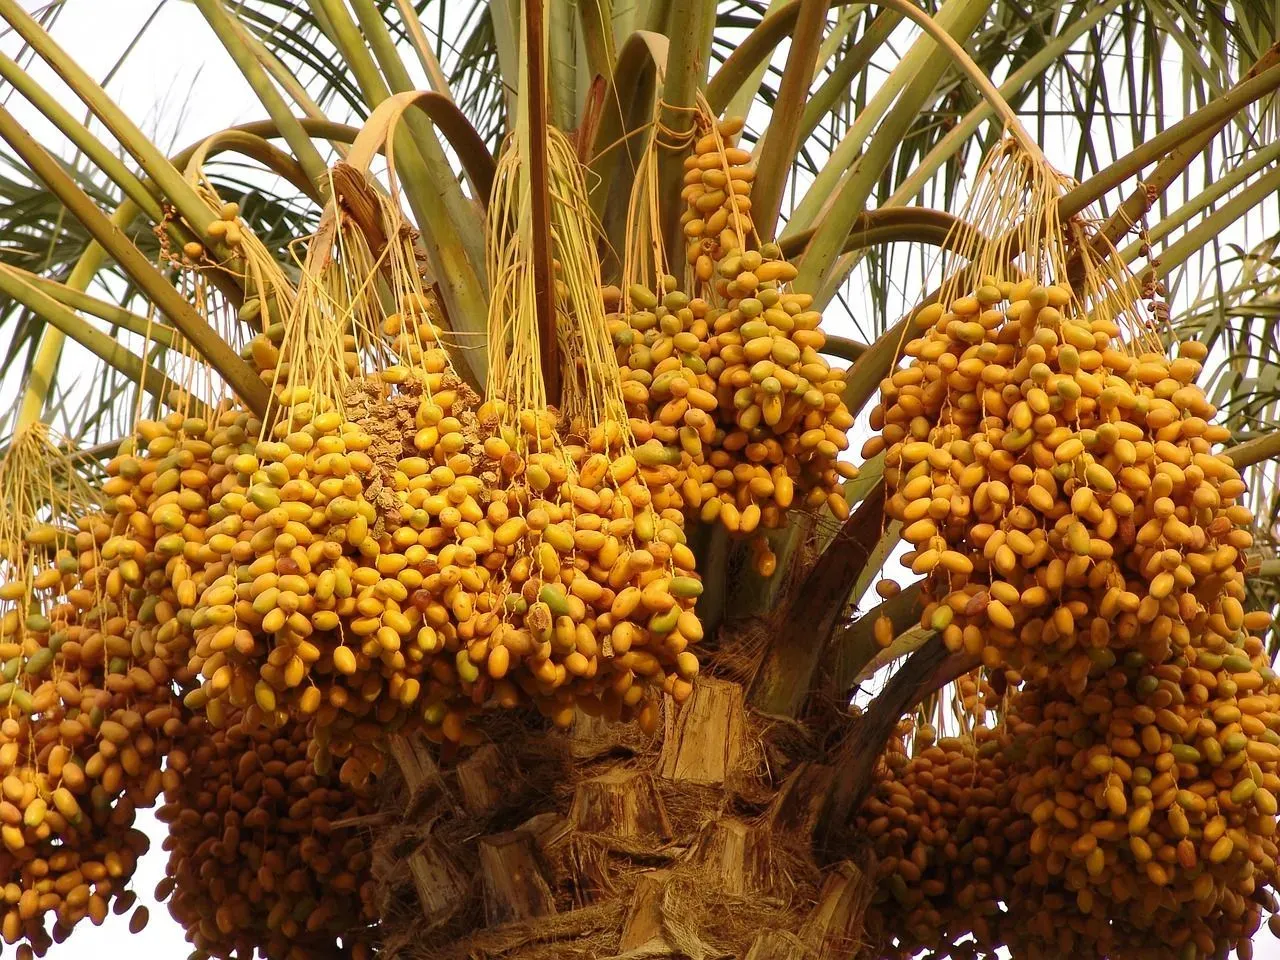 Palm trees produce a variety of fruits.